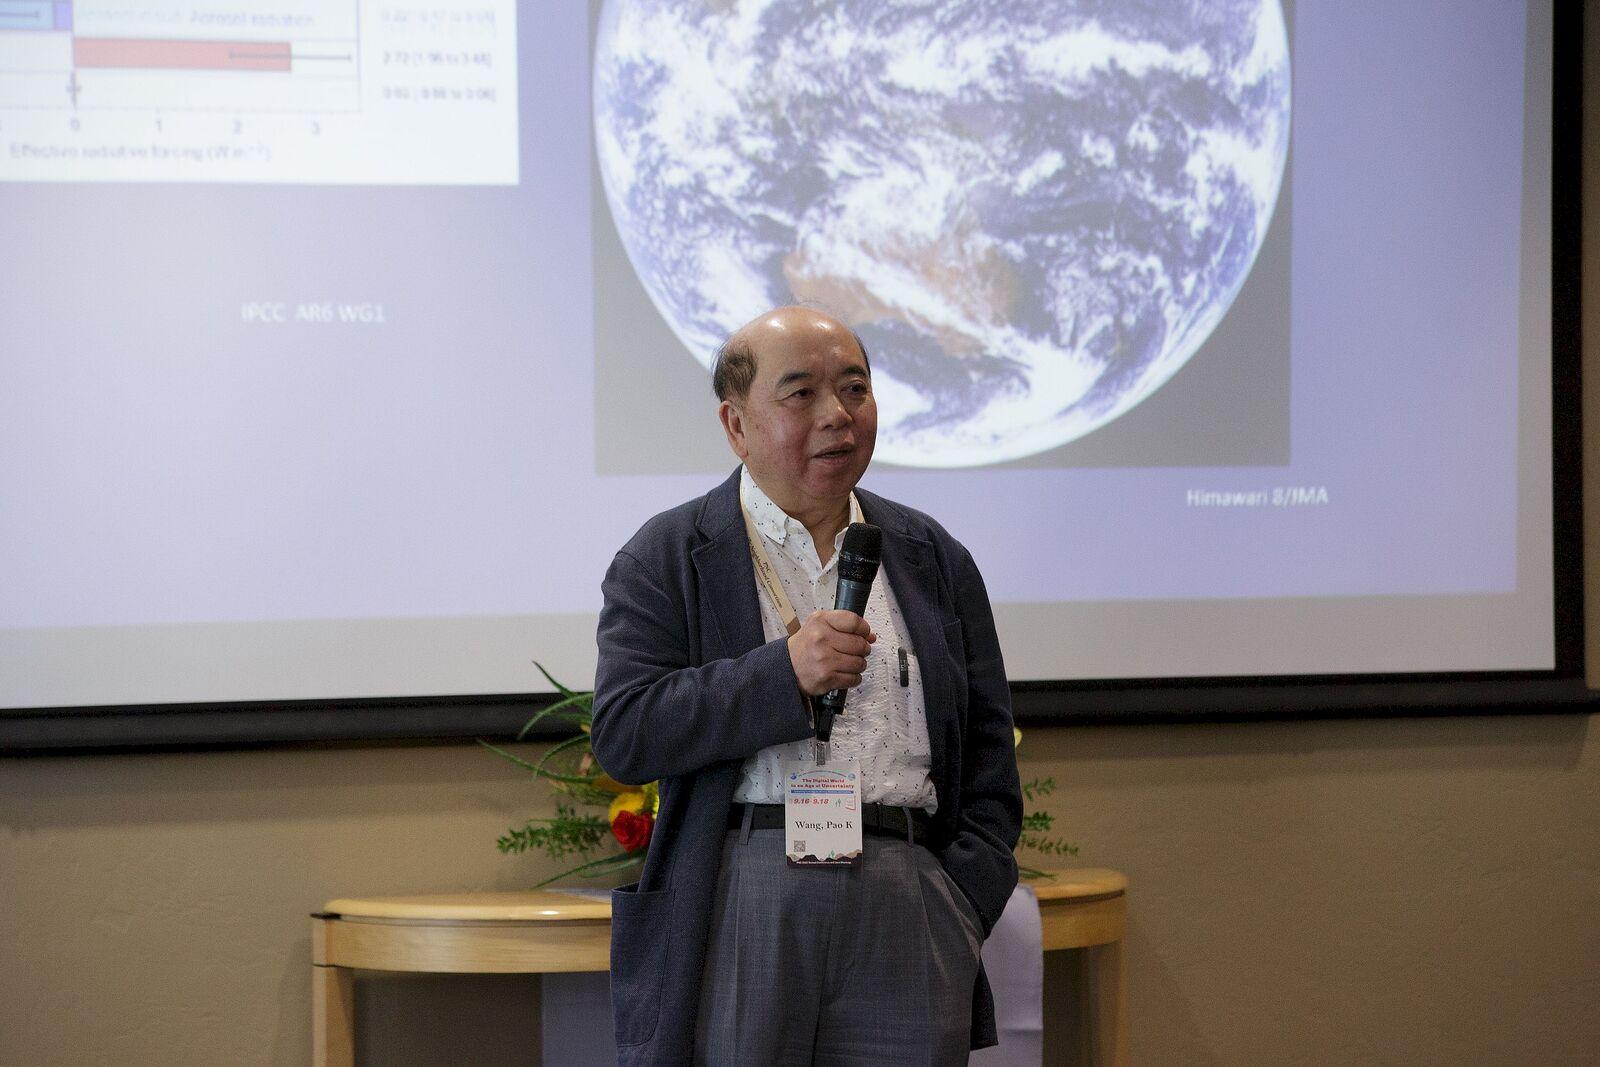 Pao K. Wang, Academician of Academia Sinica, delivered his keynote speech on “Why Clouds Are Not Innocent,” which revealed how the clouds are one of the most active actors in shaping the energy balance.